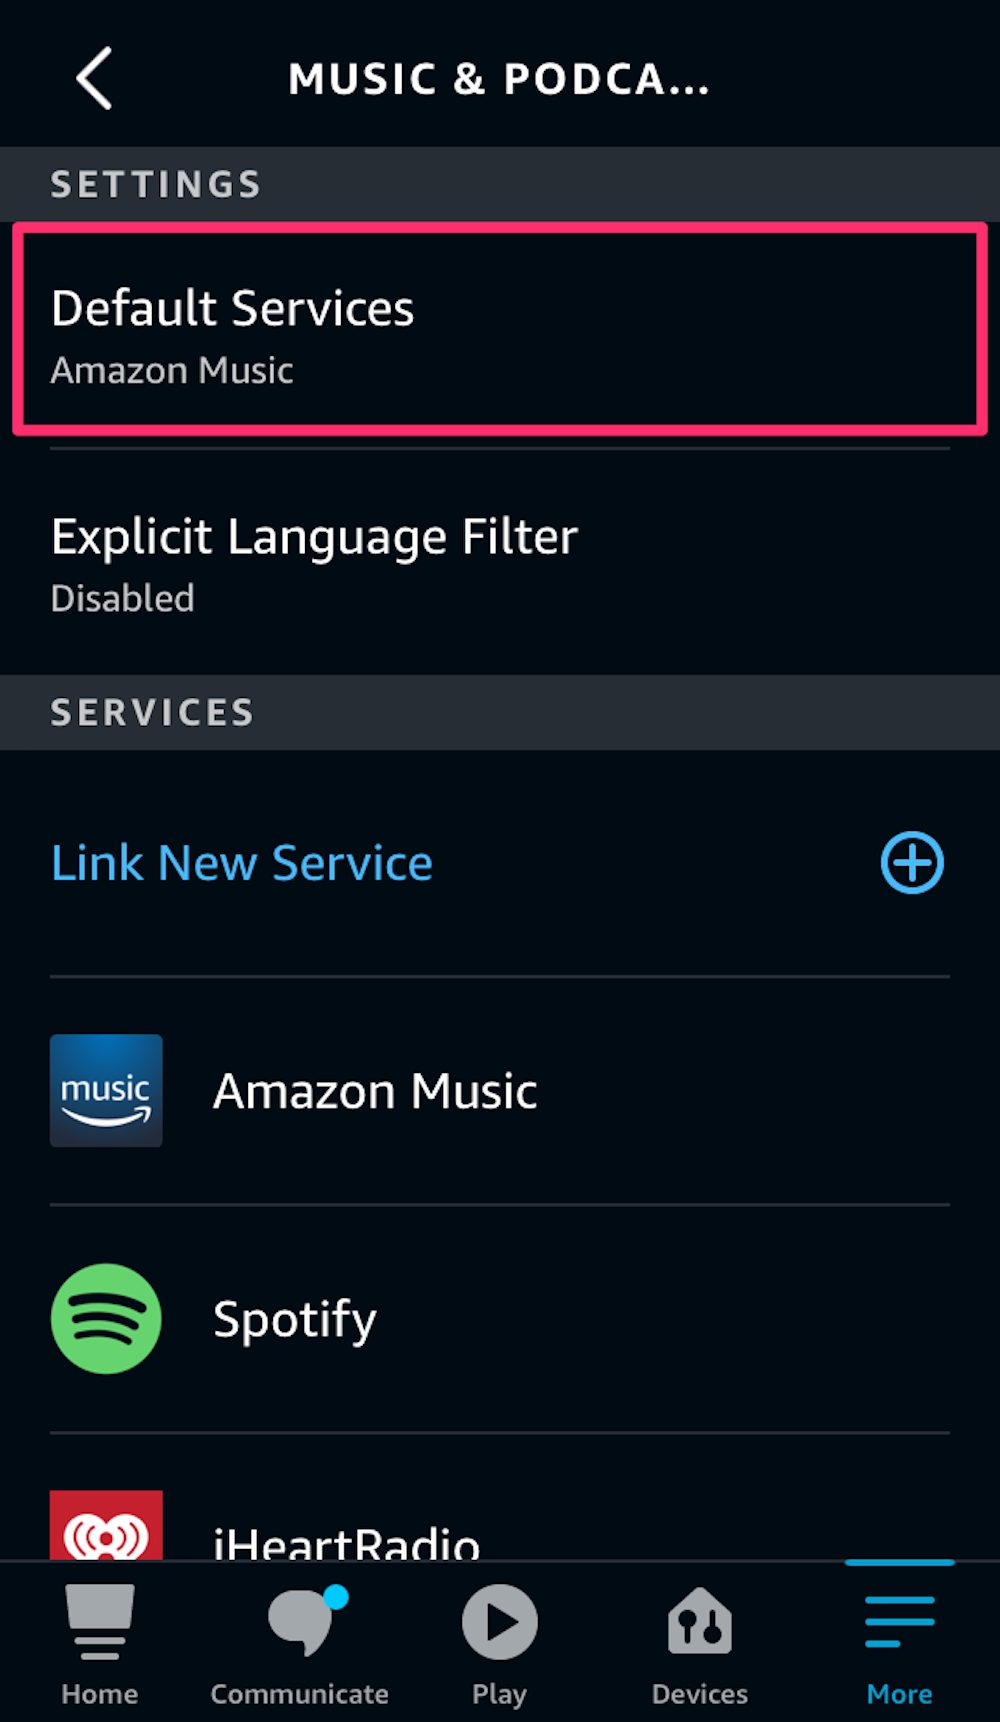 Screenshot of the Music & Podcasts area on the Alexa app